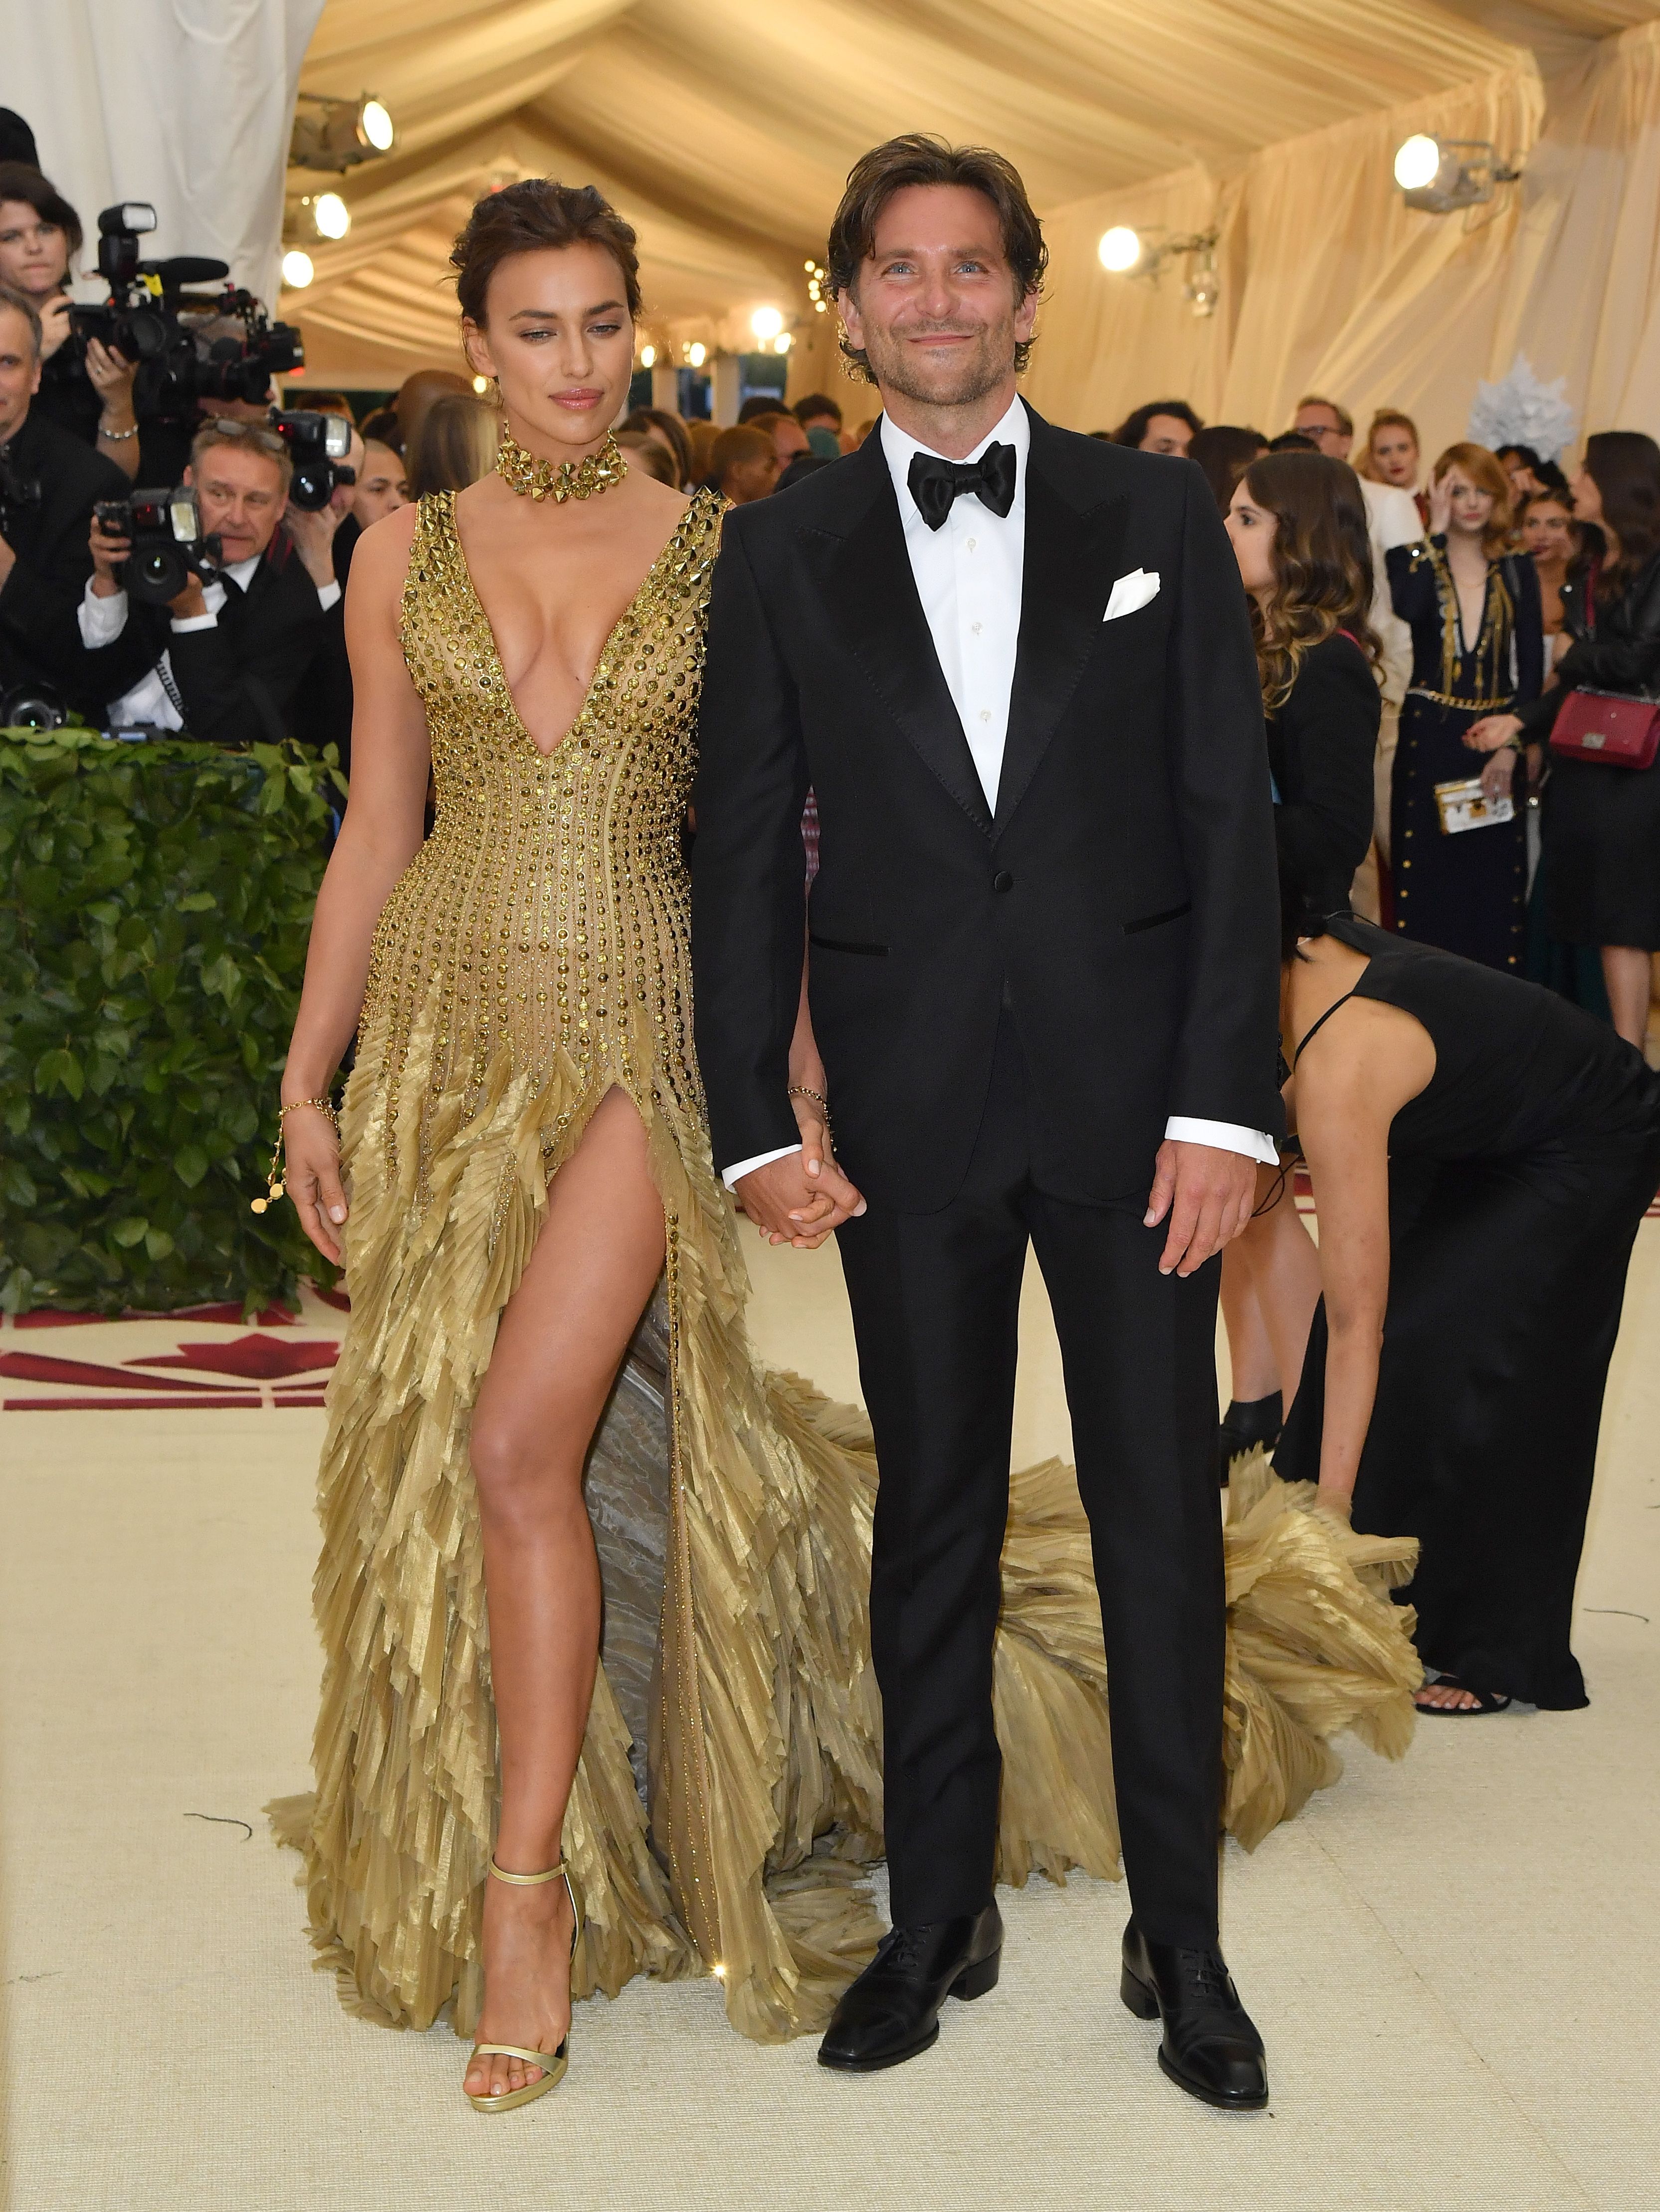 Irina Shayk and Bradley Cooper arrive for the 2018 Met Gala on May 7, 2018, at the Metropolitan Museum of Art in New York. - The Gala raises money for the Metropolitan Museum of Arts Costume Institute | Source: Getty Images